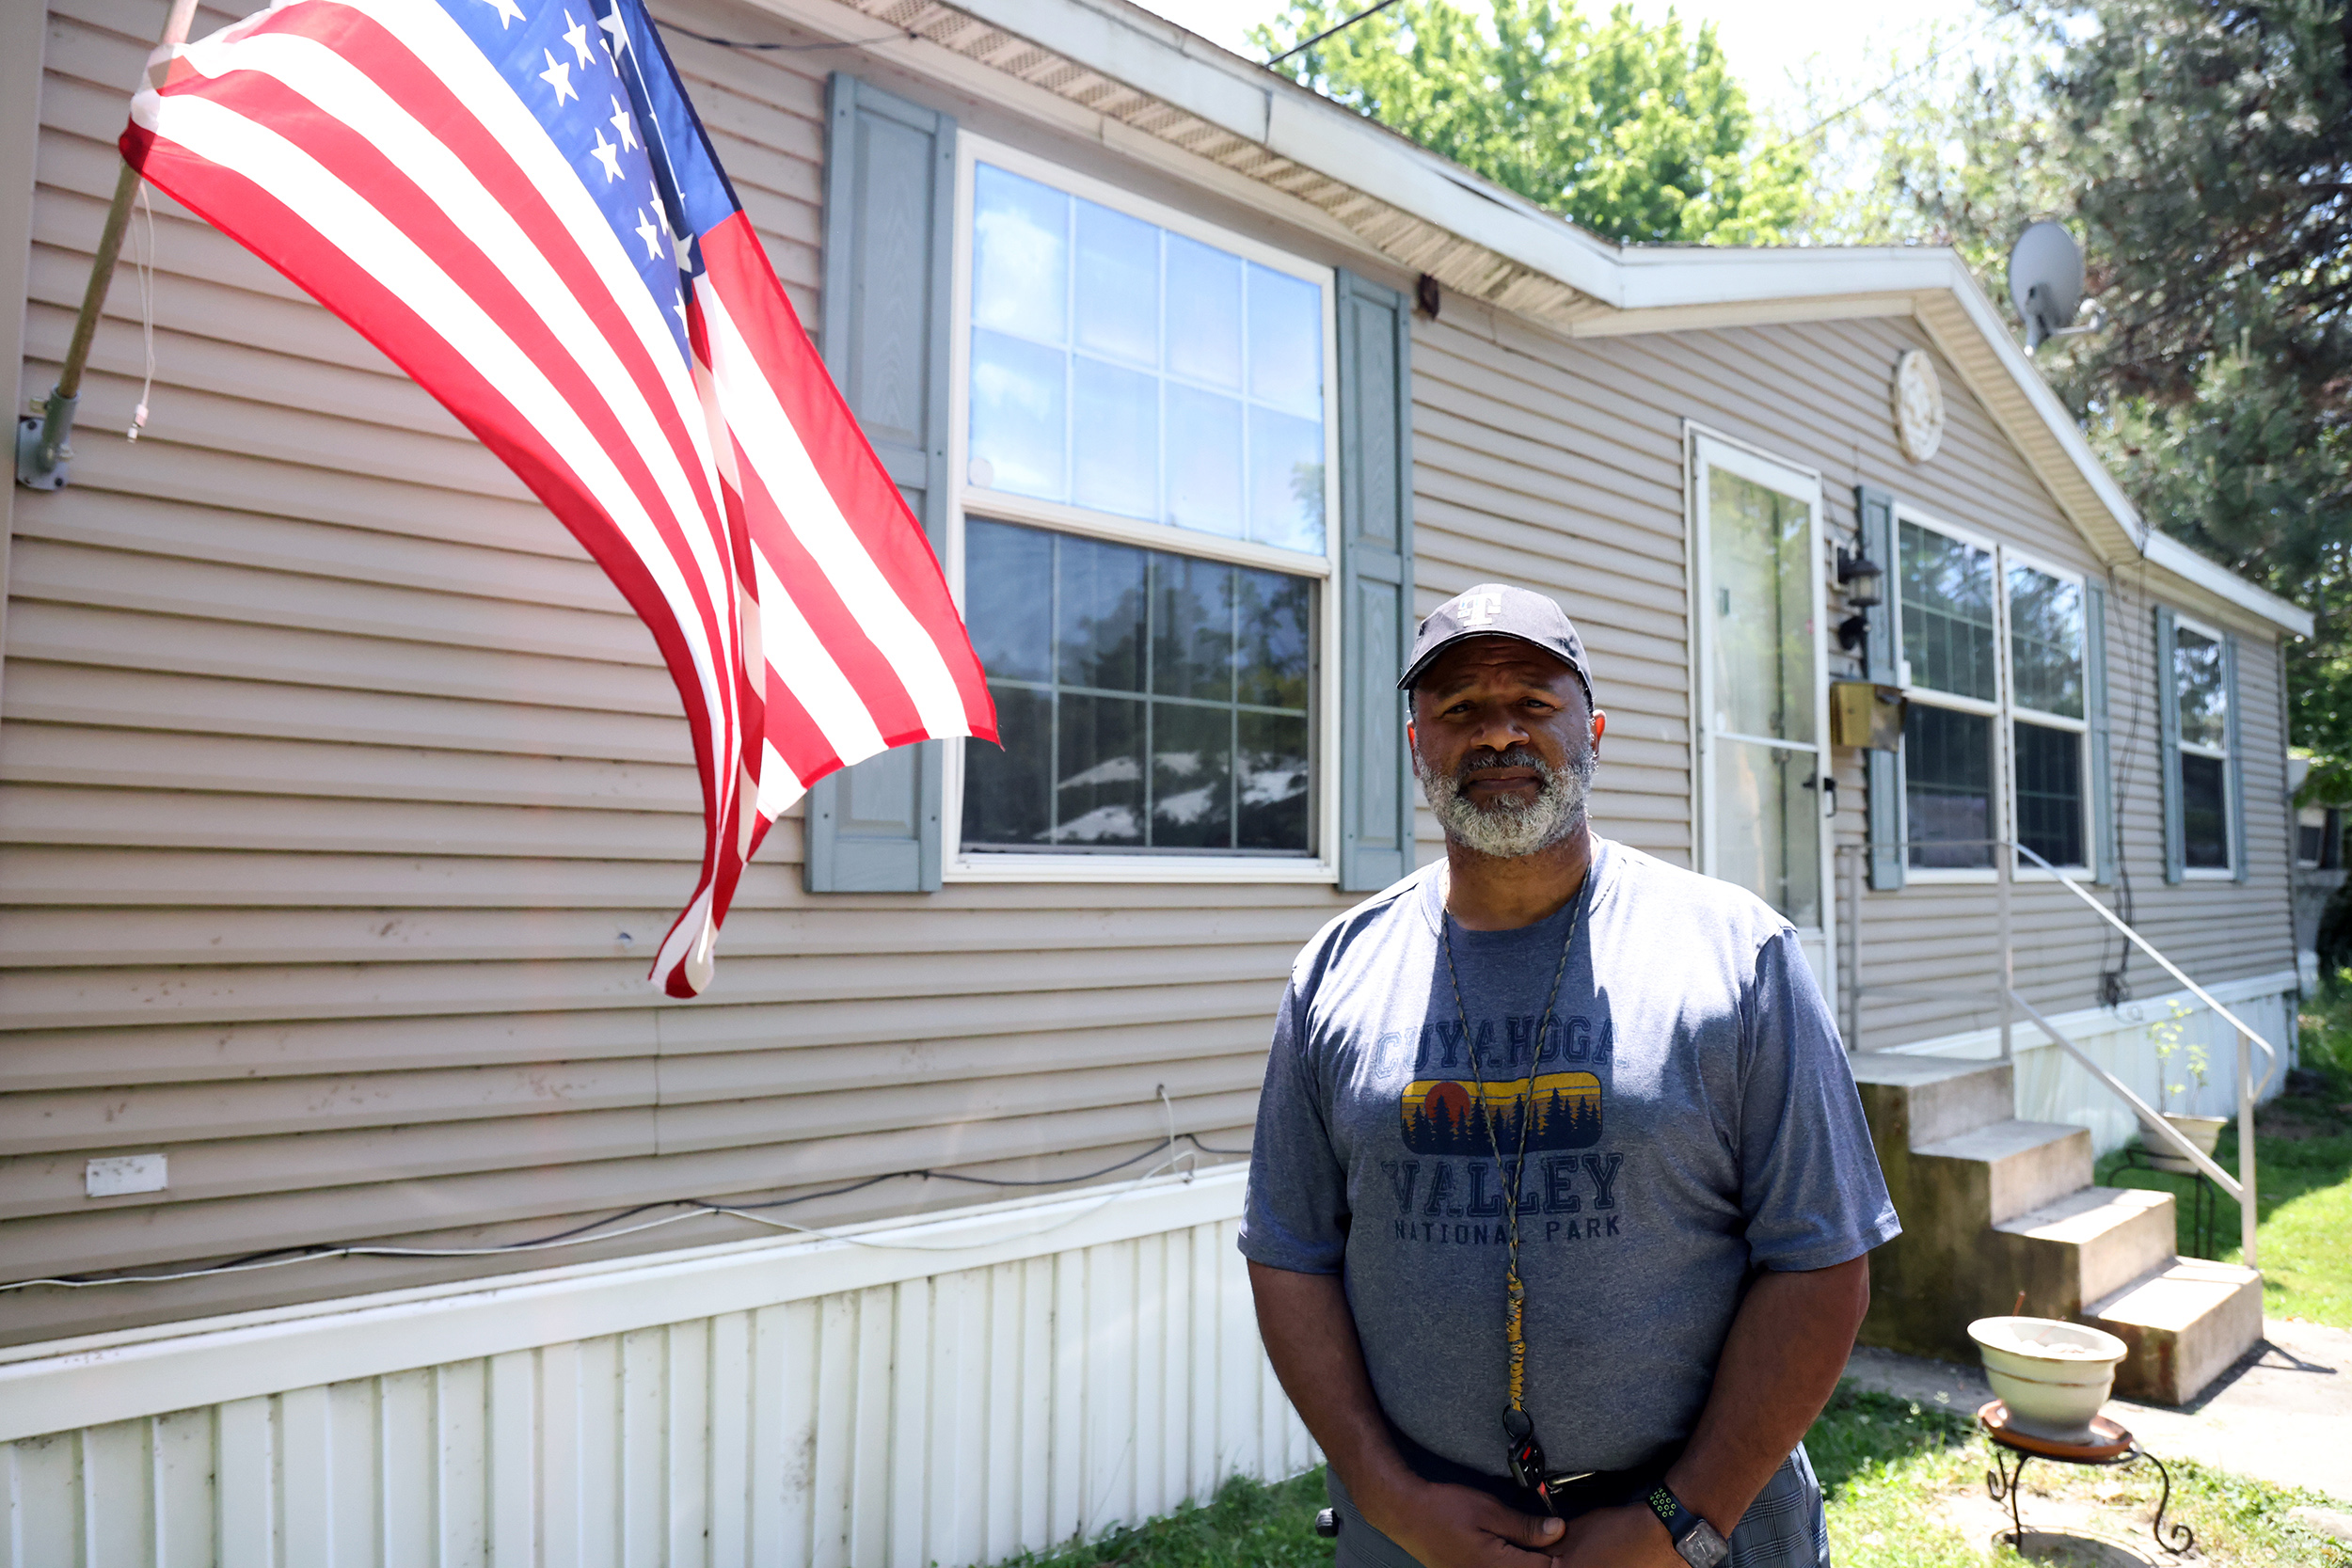 Anthony Beard outside his home at the Euclid Beach Mobile Home park. The Western Reserve Land Conservancy intends to close Euclid Beach Mobile Home park in the summer of 2024. The nonprofit will then give the land to Cleveland Metroparks, which will use it to upgrade and redevelop Euclid Beach Park into a major recreational attraction. Residents are fighting to keep their affordable housing near Lake Erie.